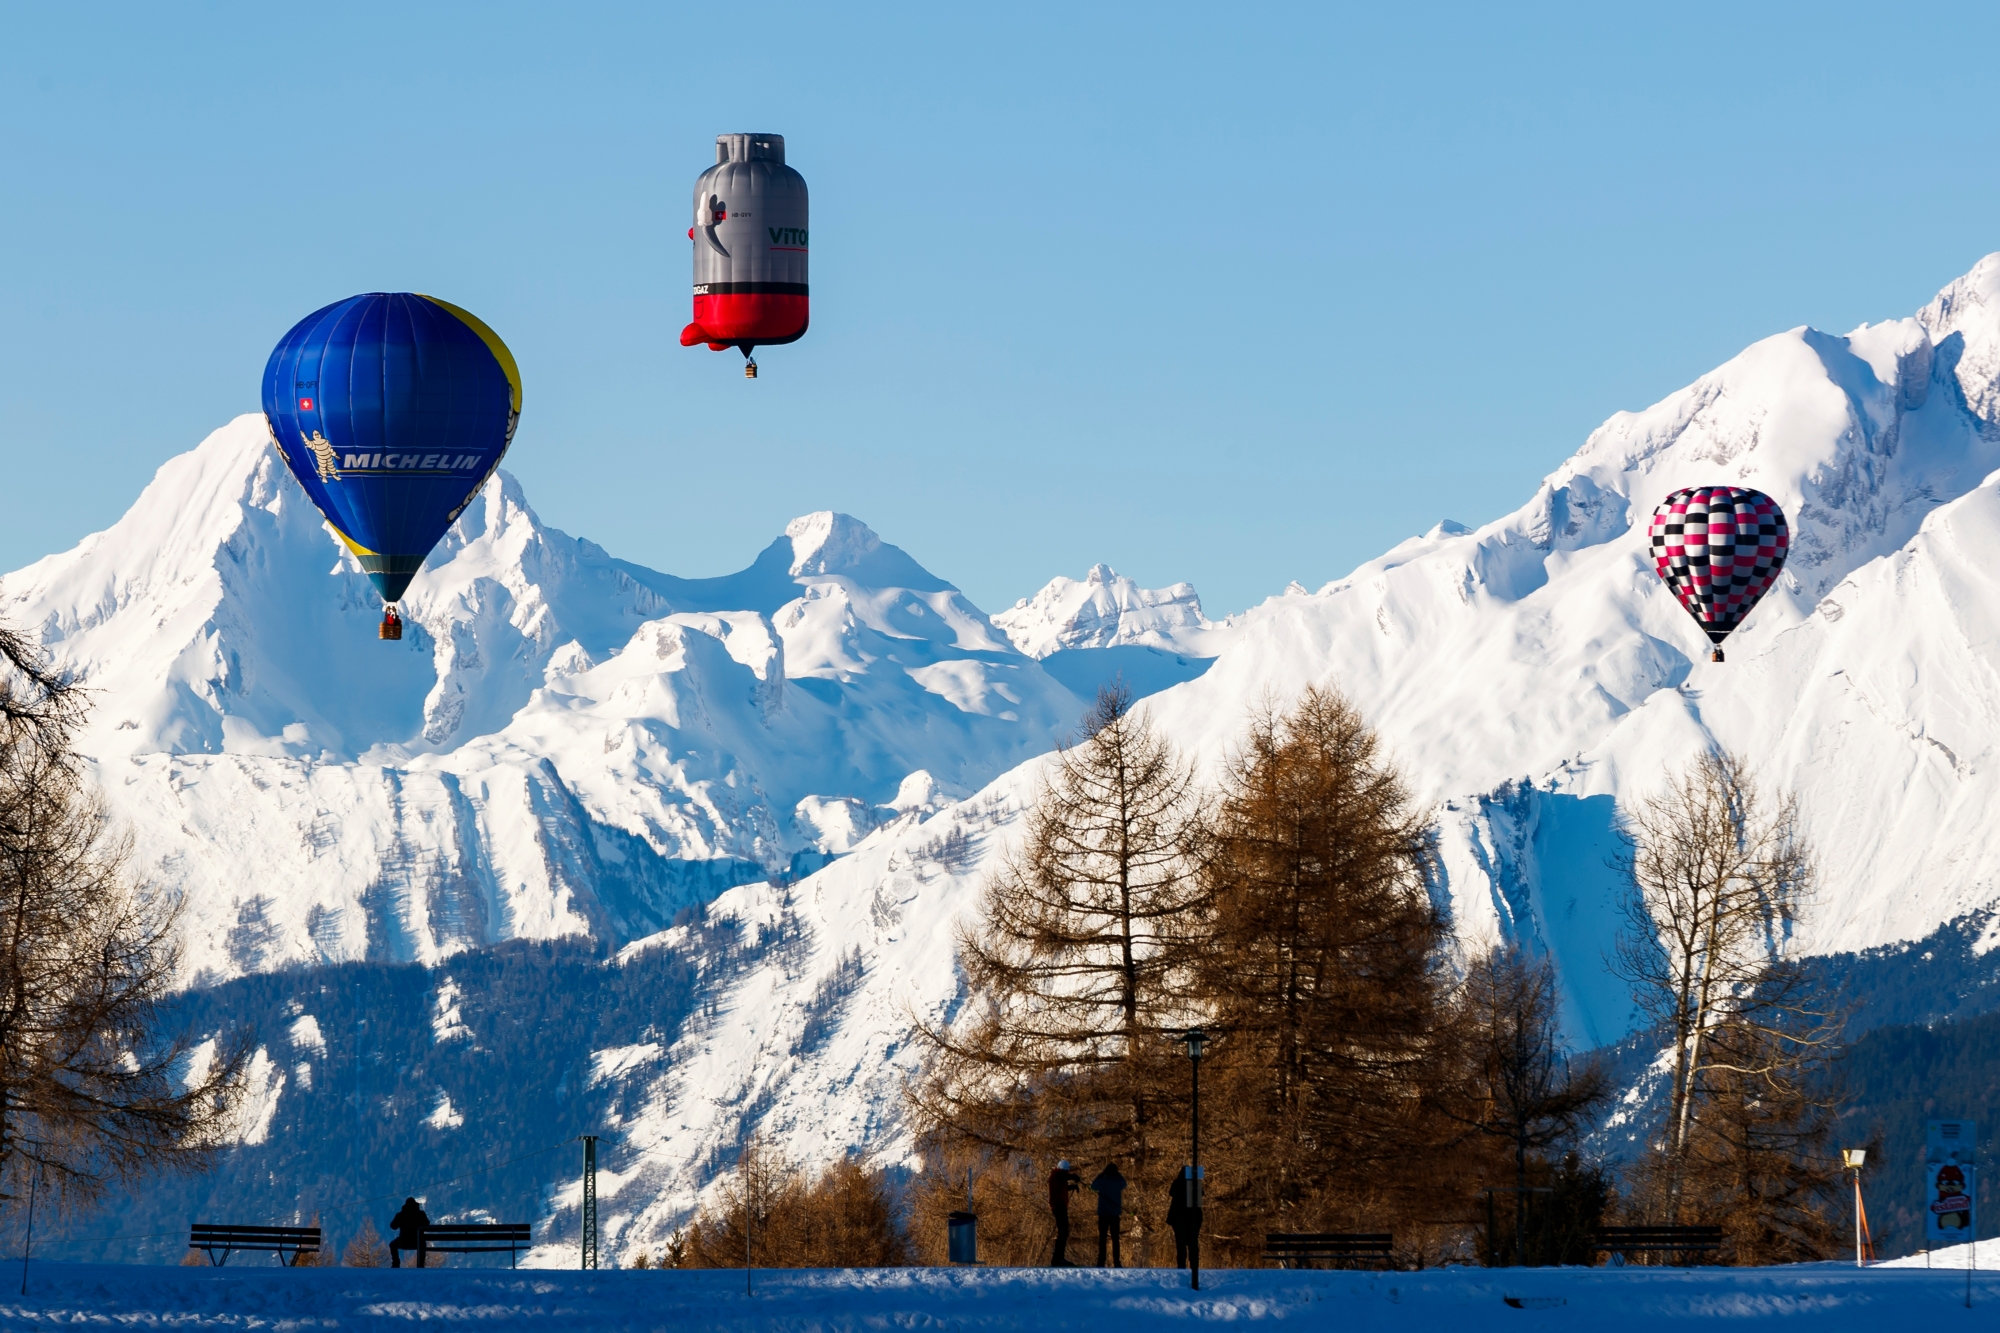 Hot air balloons fly towards a target during the "fox chase" event during the International Hot-Air Balloon Meeting hosted over the weekend in the alpine resort of Crans-Montana, Switzerland, Saturday January 13, 2018. (KEYSTONE/Valentin Flauraud) SWITZERLAND HOT AIR BALLOON MEETING